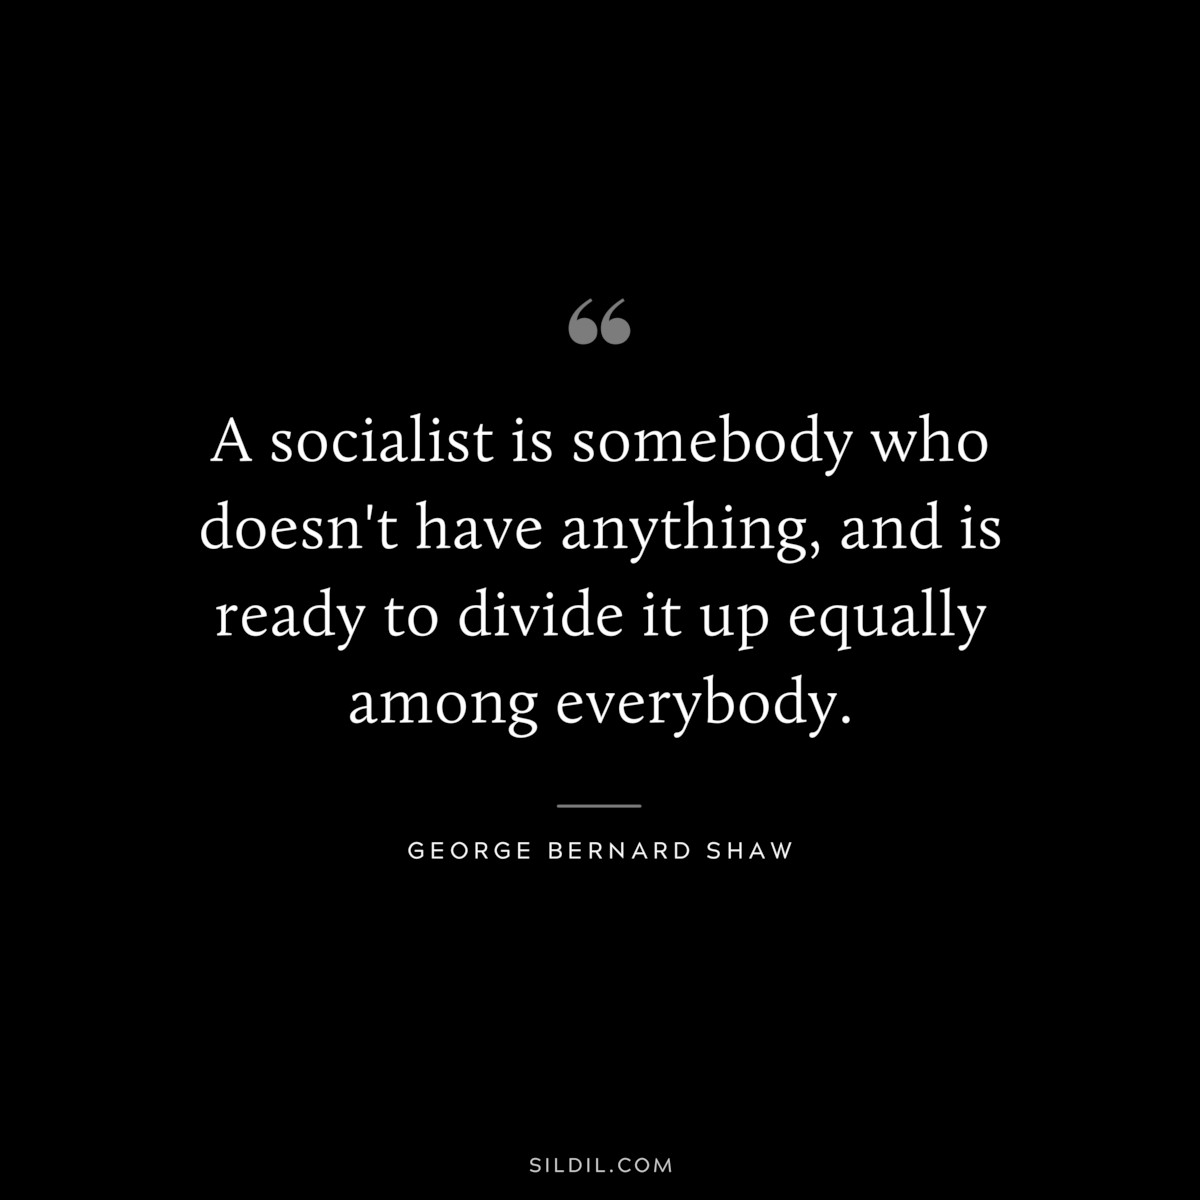 A socialist is somebody who doesn't have anything, and is ready to divide it up equally among everybody. ― George Bernard Shaw